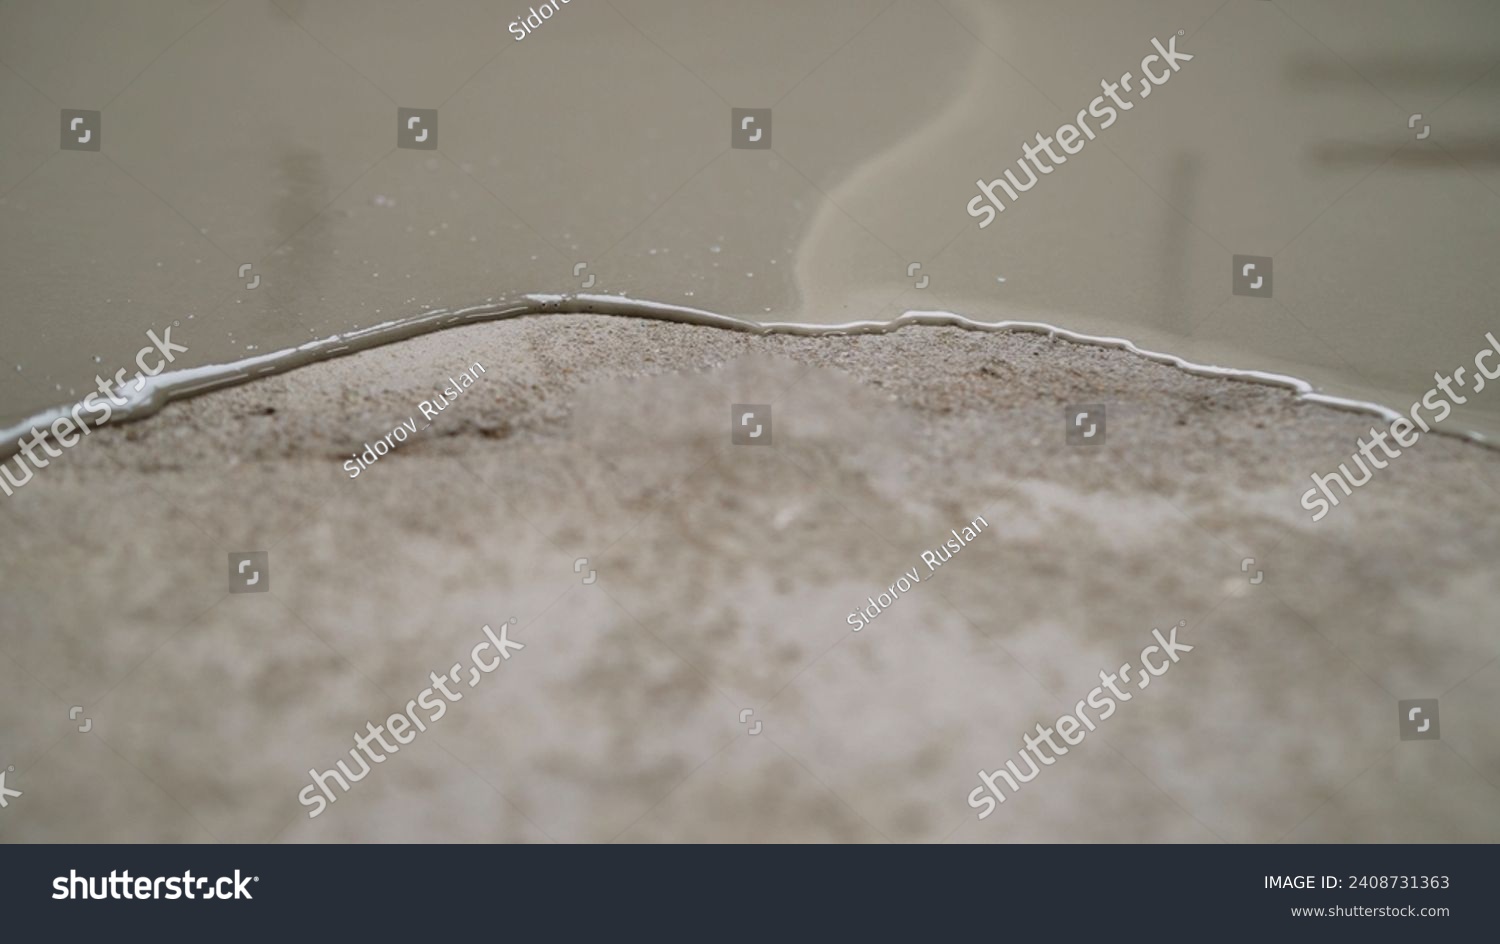 Self-leveling floor on a concrete surface close-up. Partial covering of the floor with self-leveling cement mortar. Self-leveling mixture for repairing floors in an apartment. #2408731363